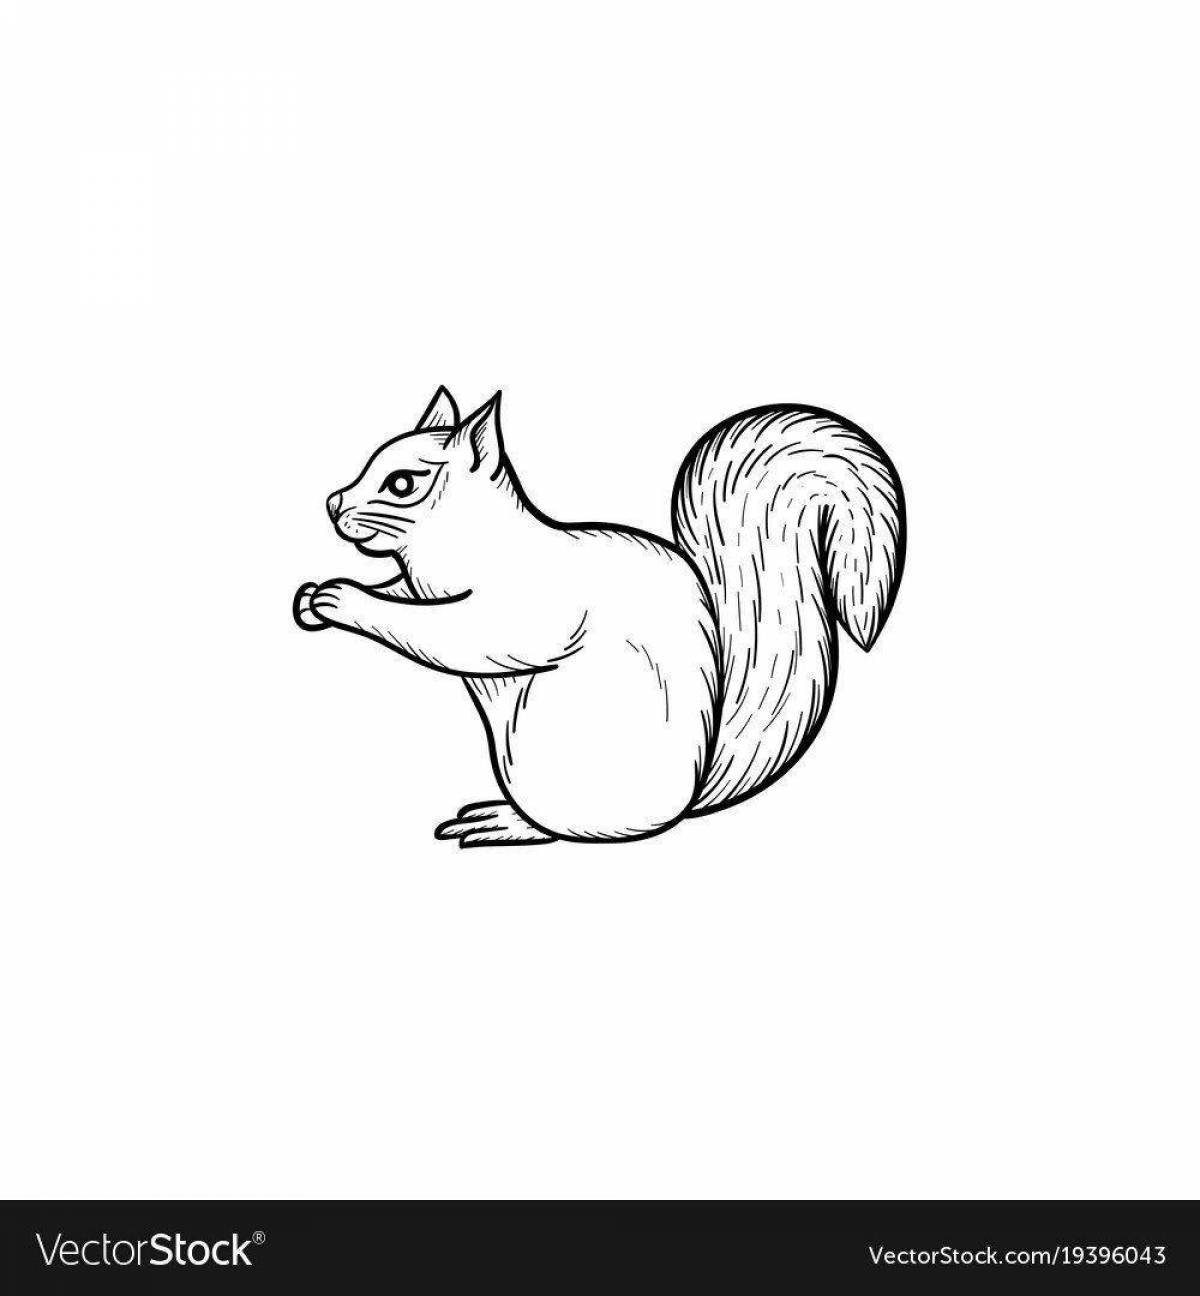 Coloring page energetic little squirrel